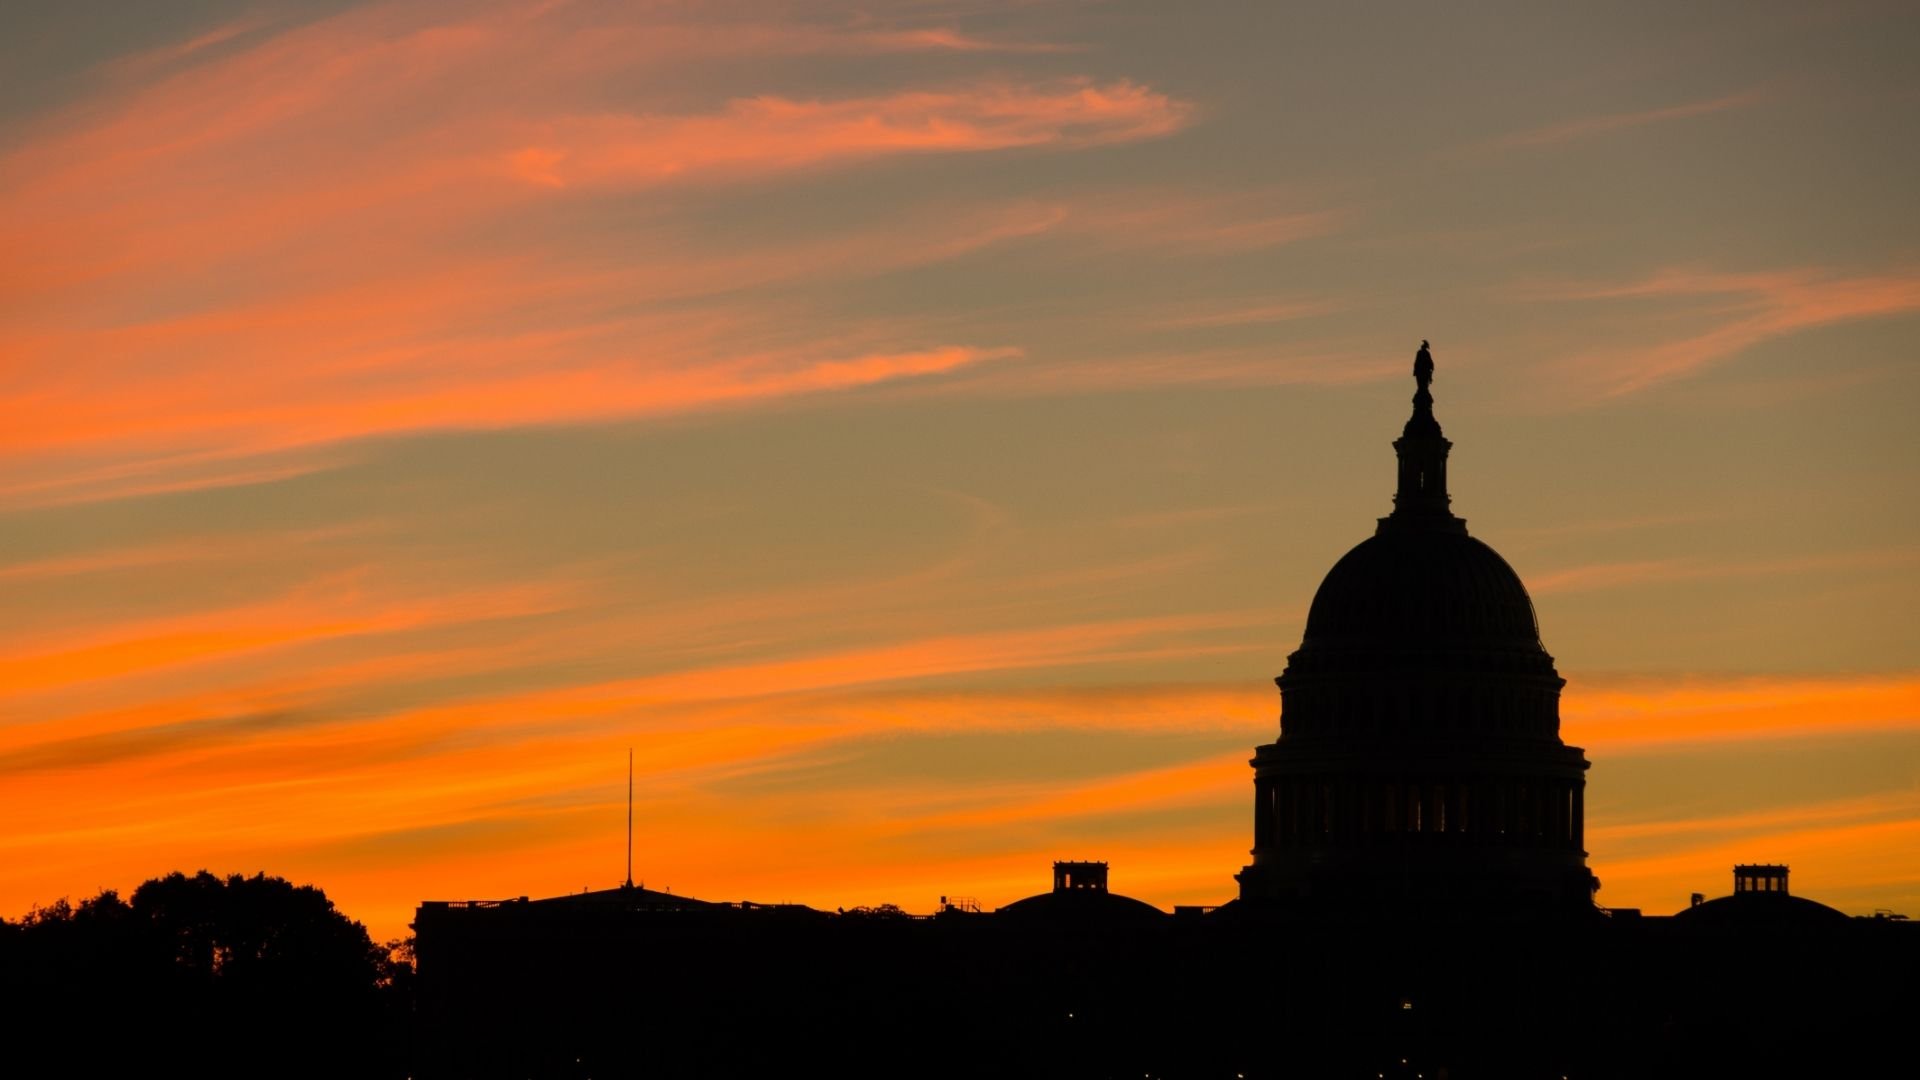 Federal Government, Cloud Computing Holds Tremendous Potential to Deliver Public Value